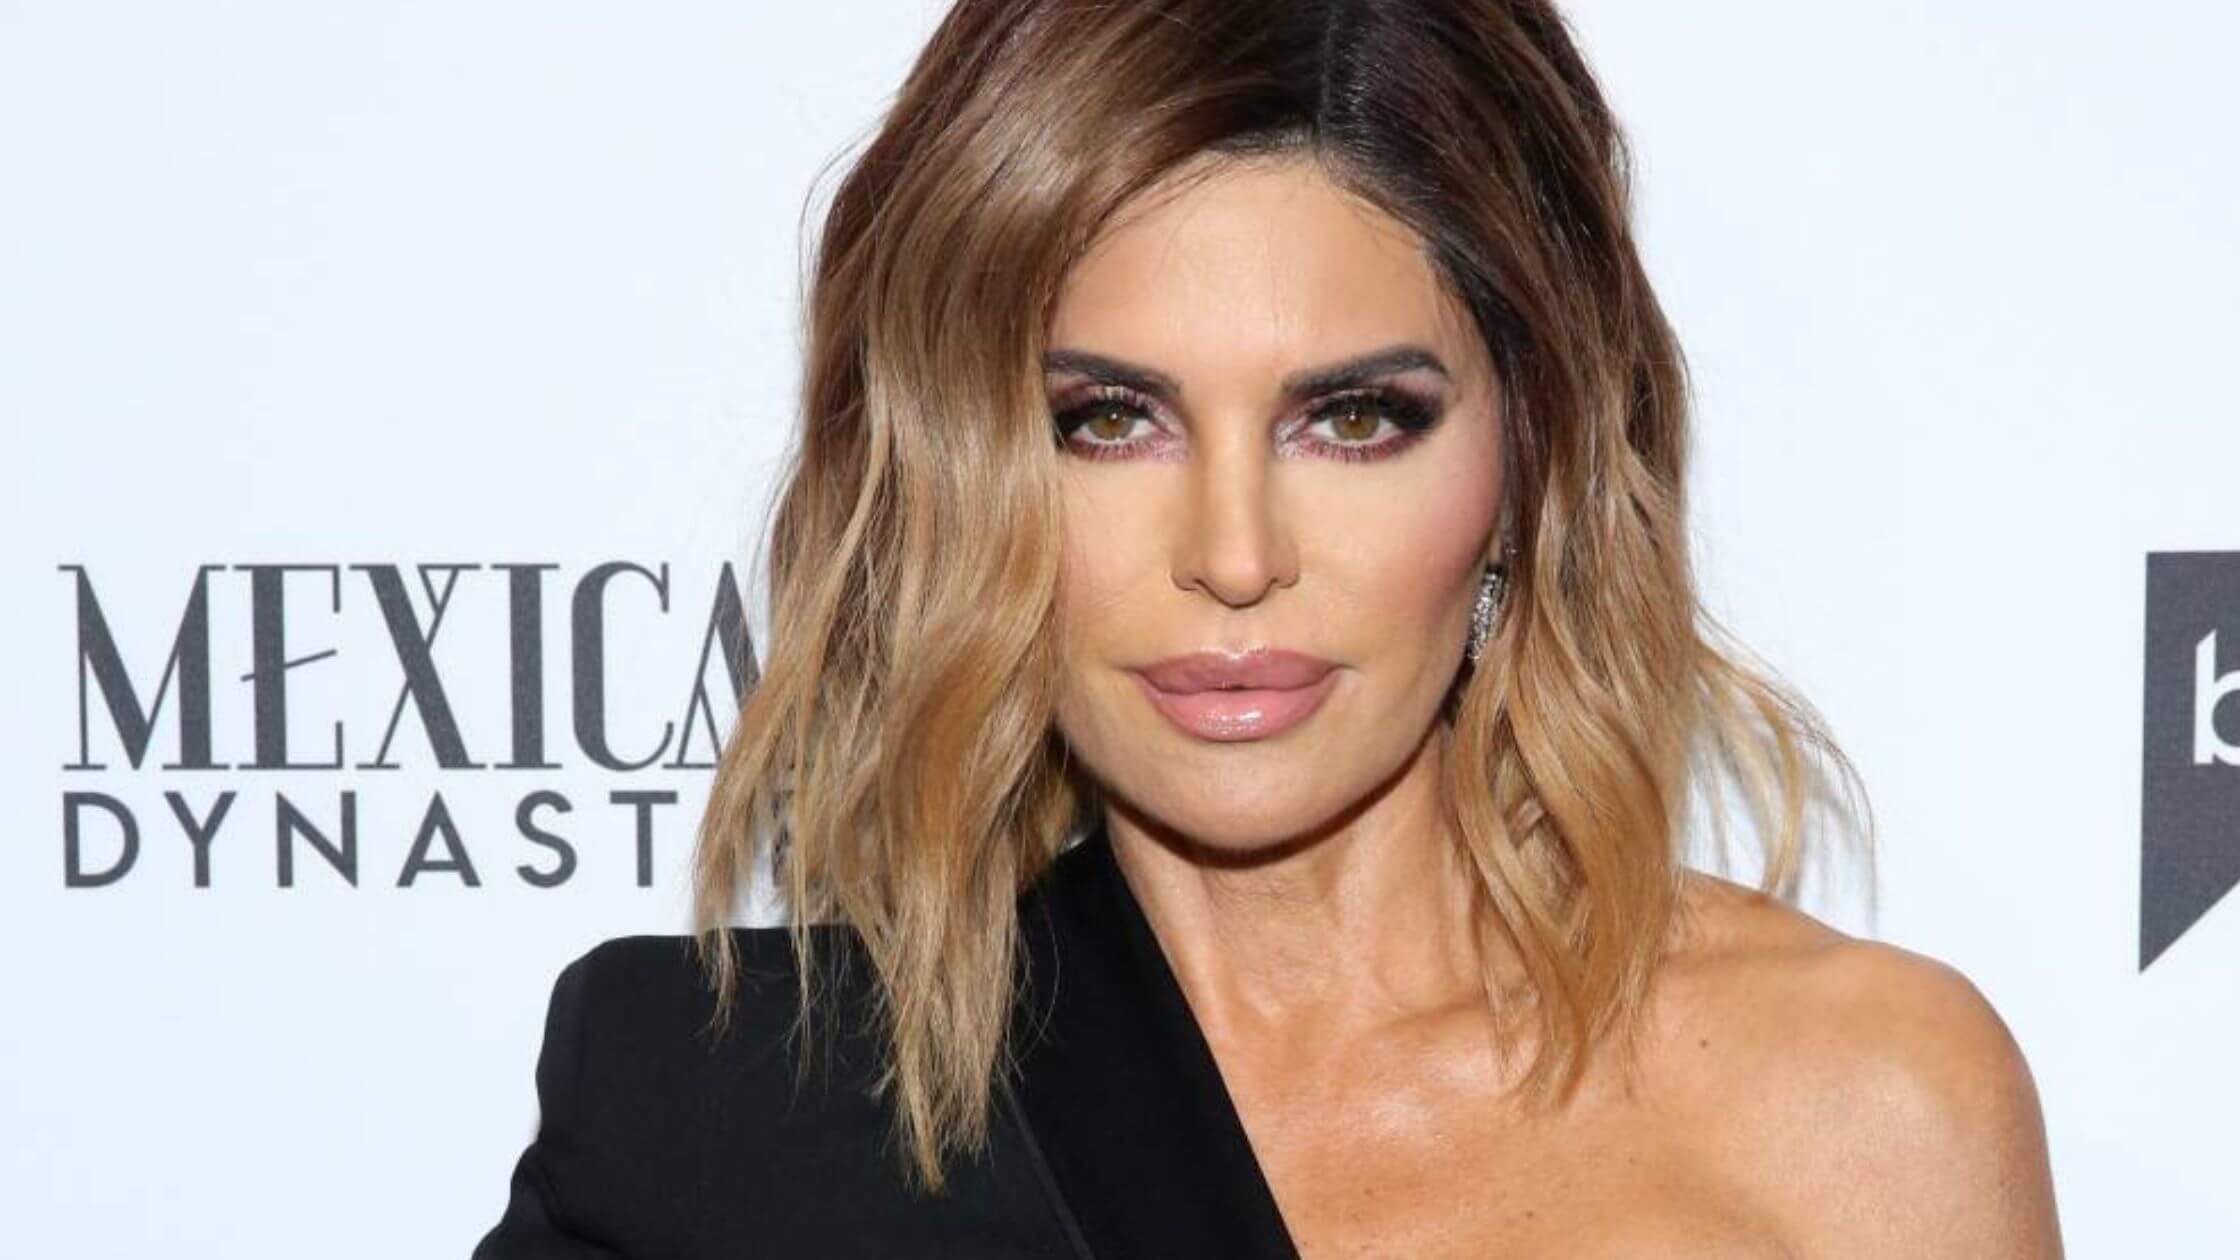 Lisa Rinna Celebrates Her 59th Birthday By Posing In A Barely-There Bikini